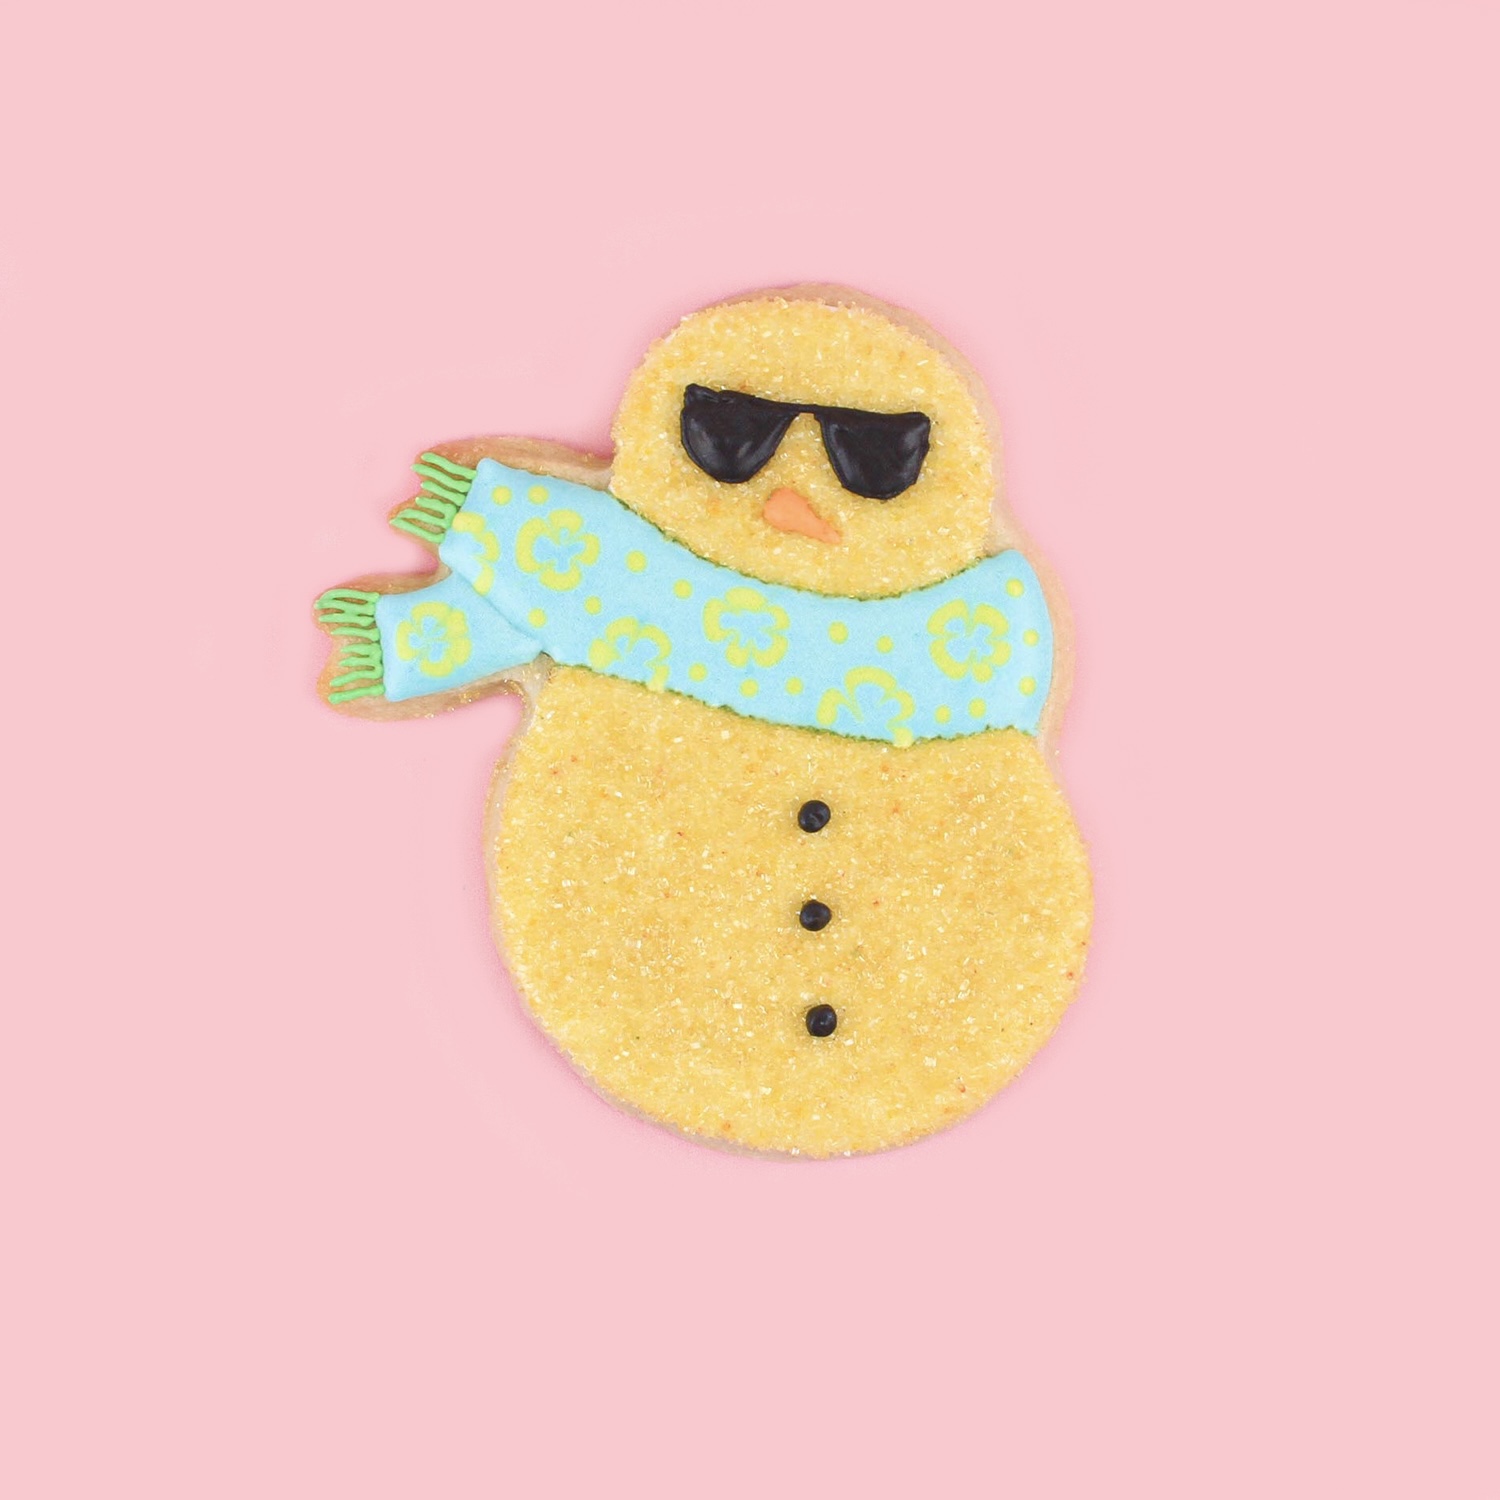 Snowman royal icng cookie dipped in gold sanding sugar and a blue royal icing scarf and sunglasses.